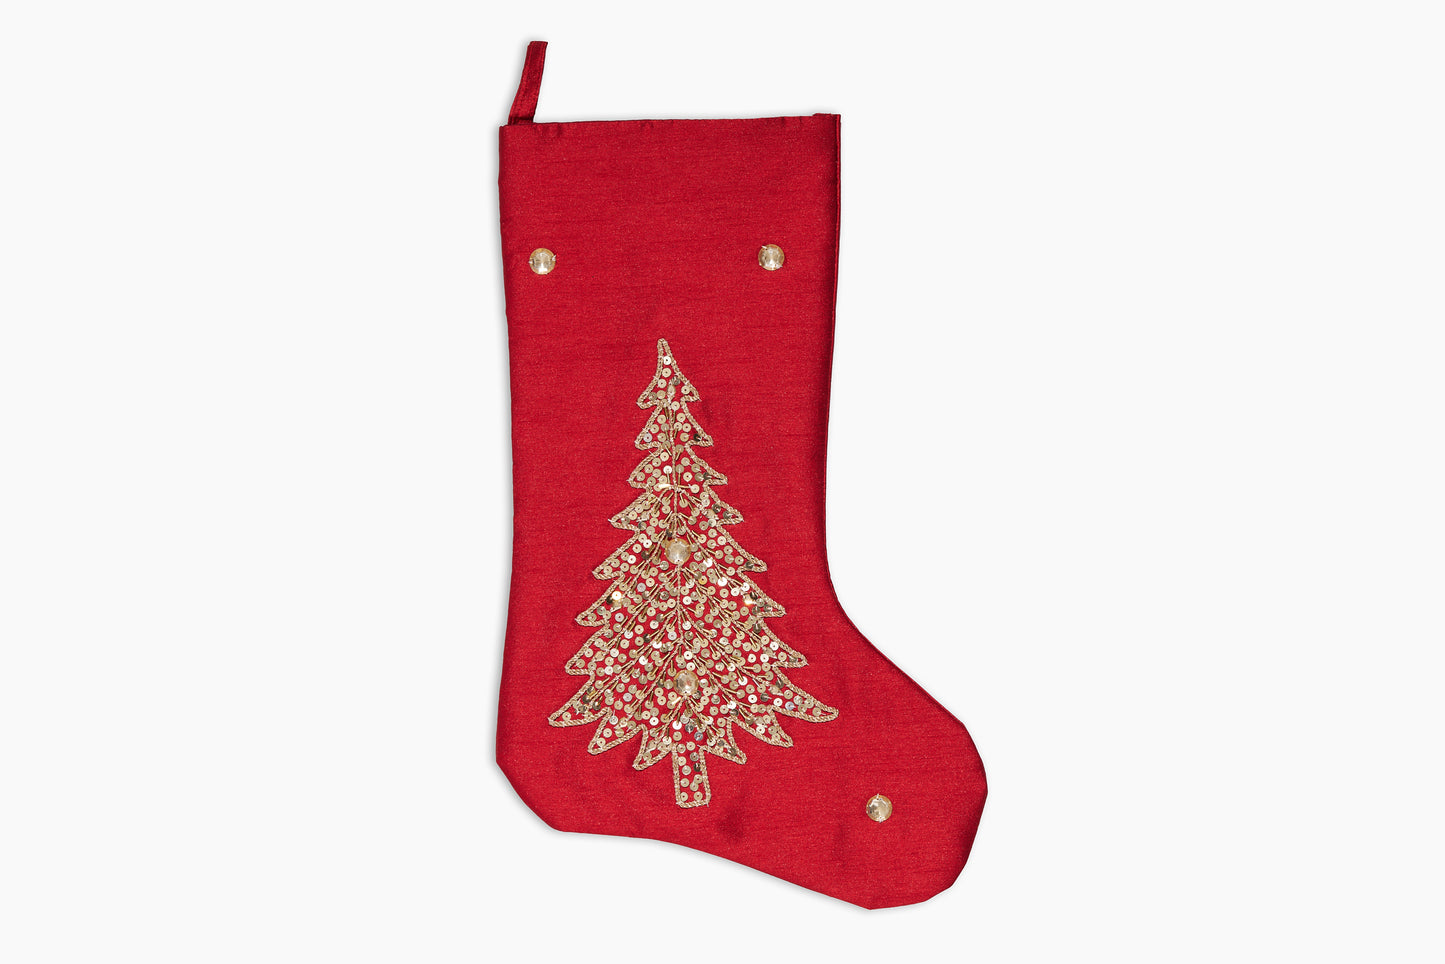 Gold Tree on Red Stocking